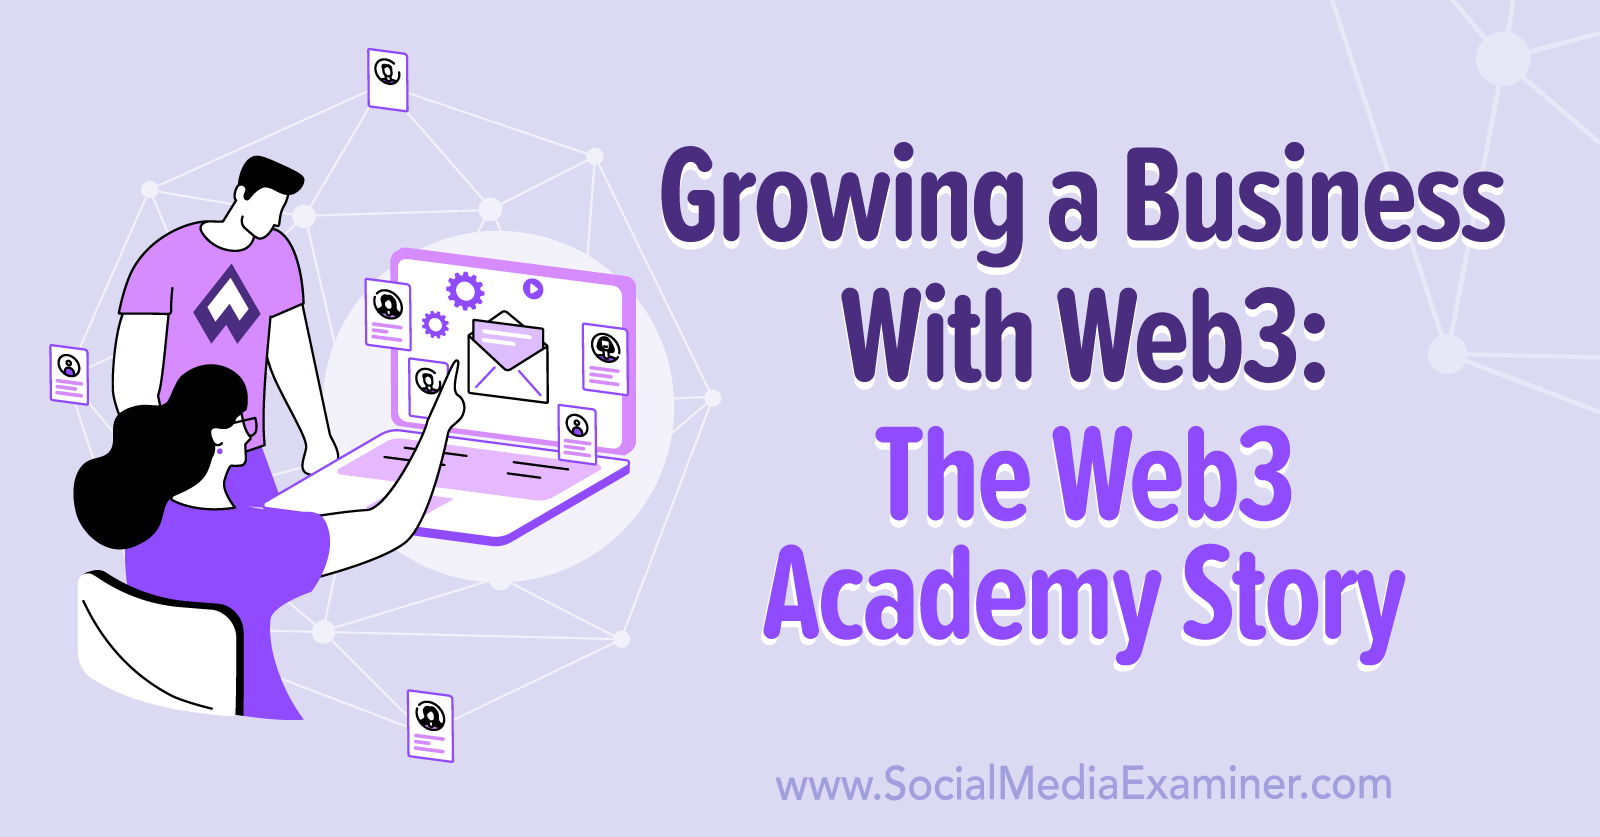 Growing a Business With Web3: The Web3 Academy Story by Social Media Examiner